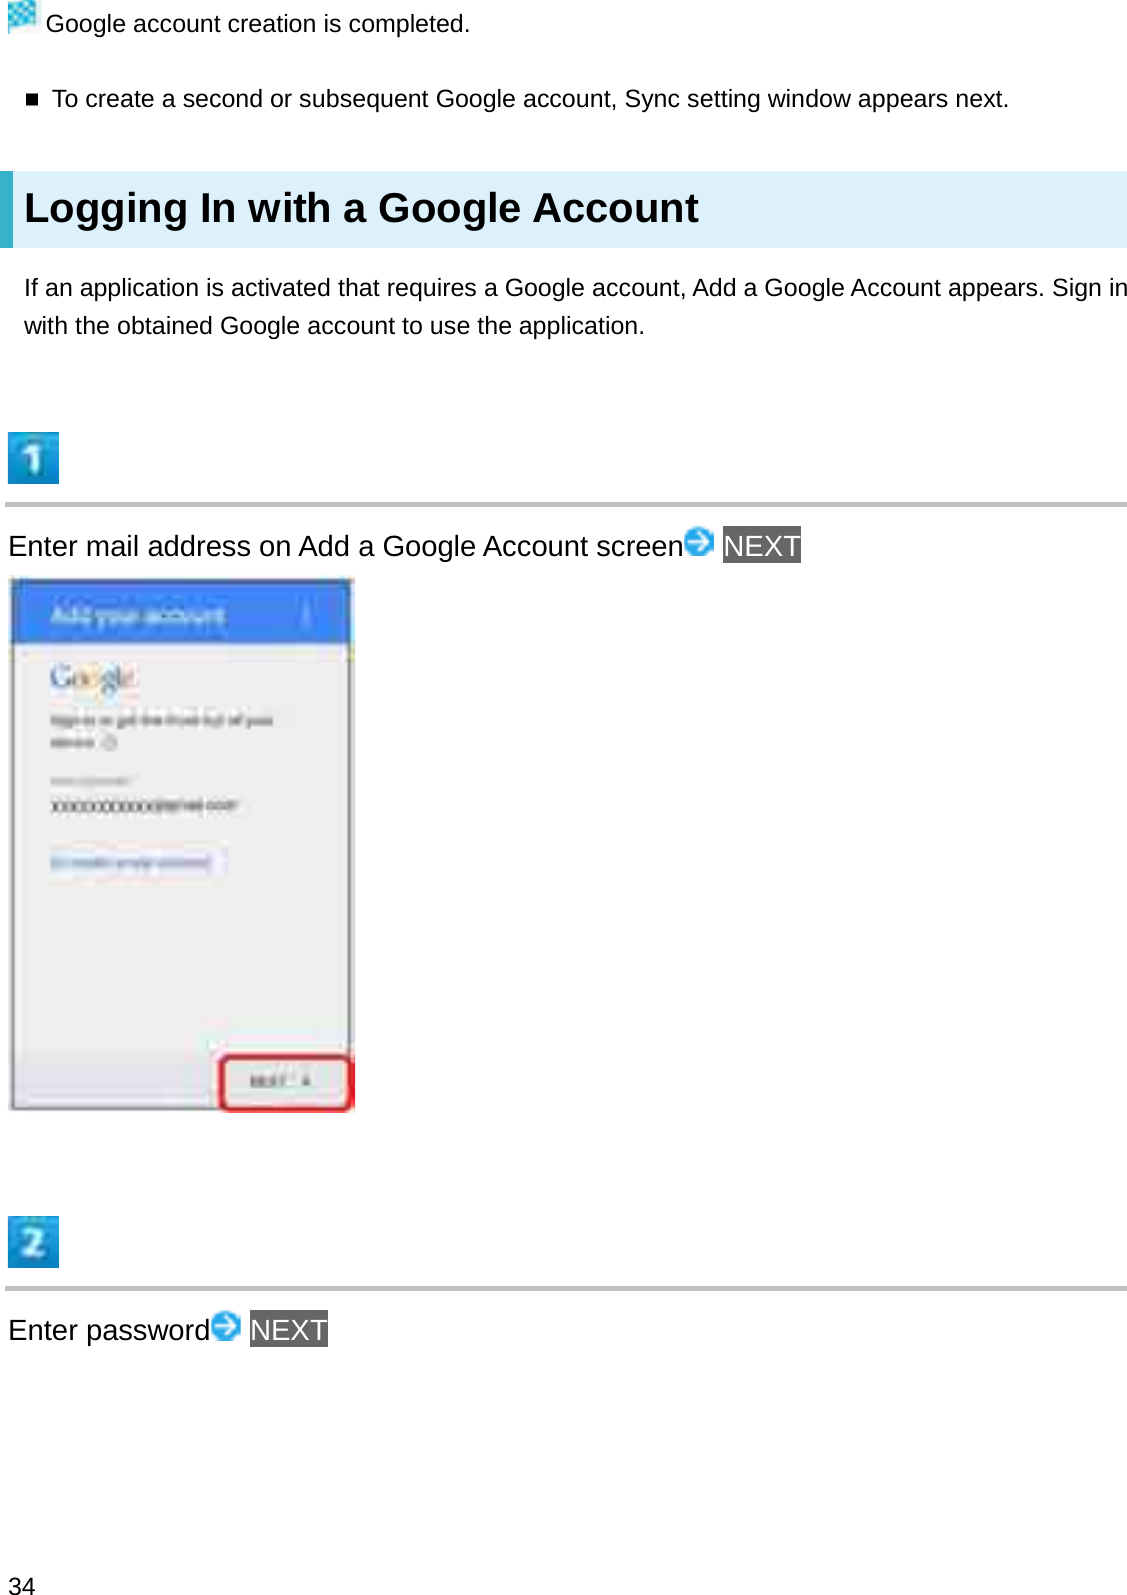 Google account creation is completed.To create a second or subsequent Google account, Sync setting window appears next.Logging In with a Google AccountIf an application is activated that requires a Google account, Add a Google Account appears. Sign in with the obtained Google account to use the application.Enter mail address on Add a Google Account screen NEXTEnter password NEXT34